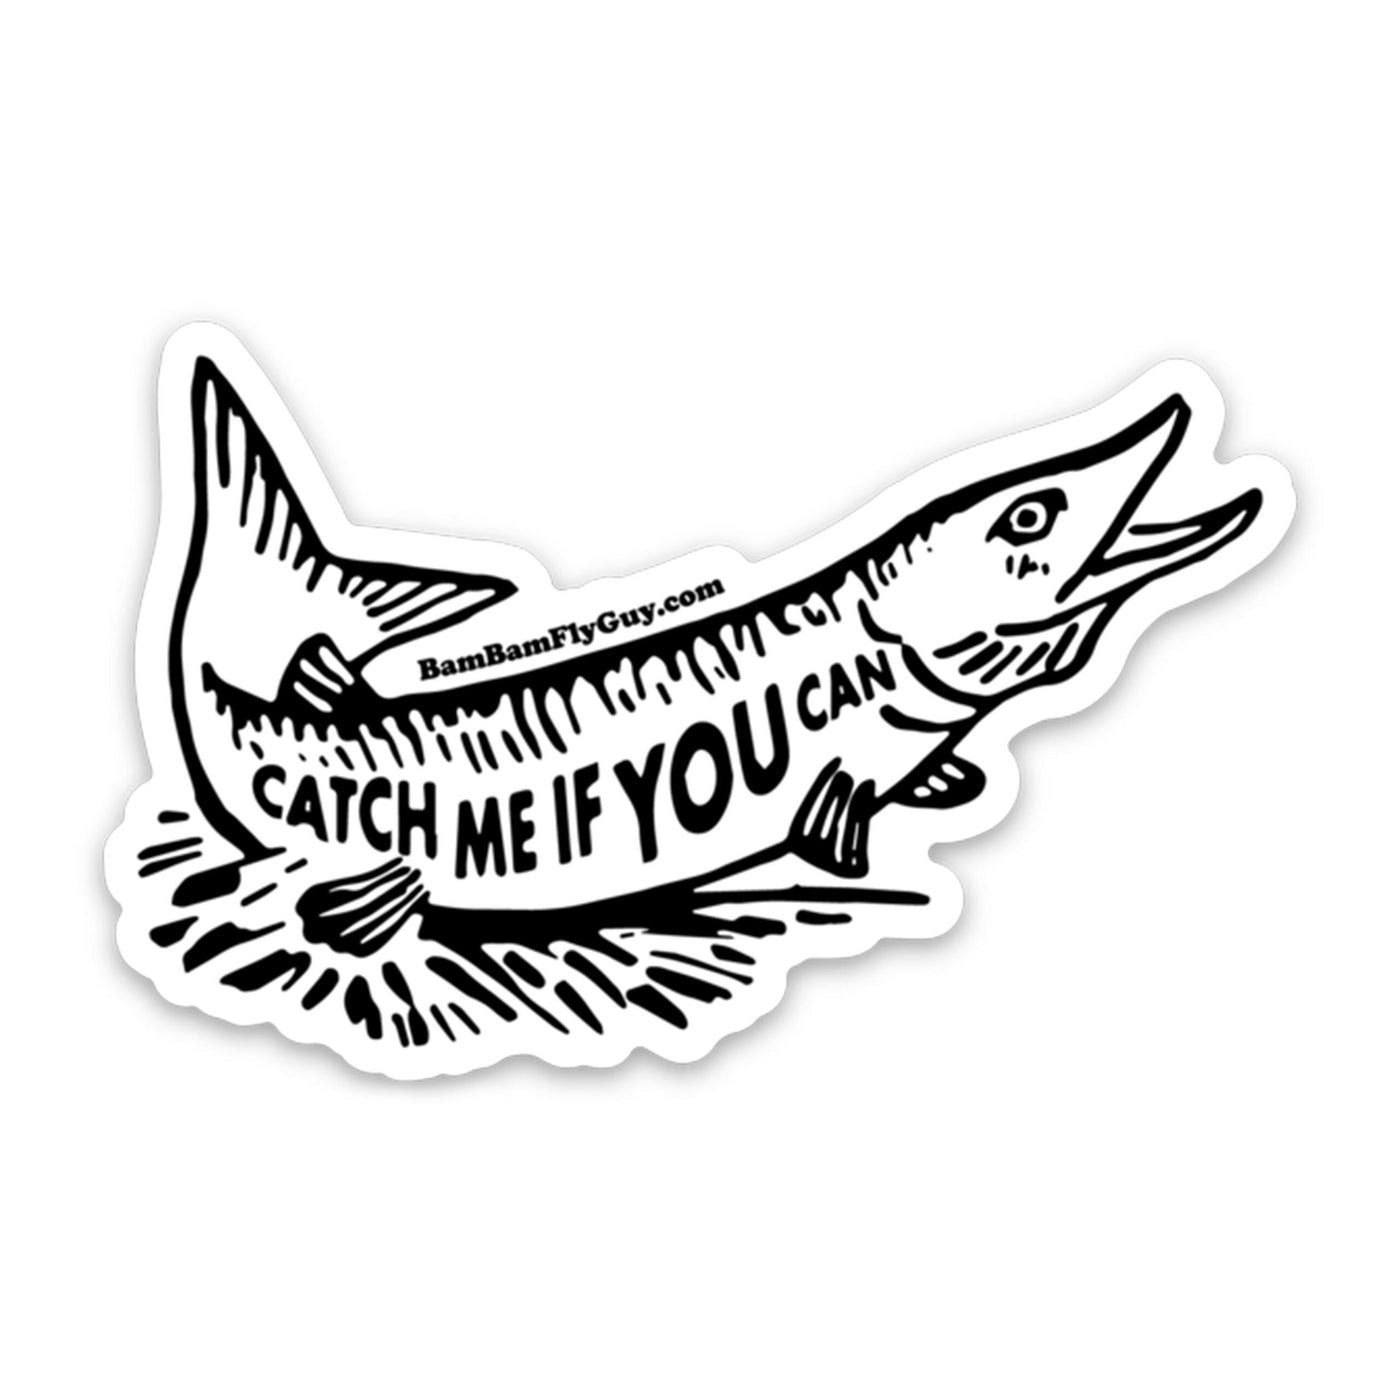 Catch Me If You Can Sticker